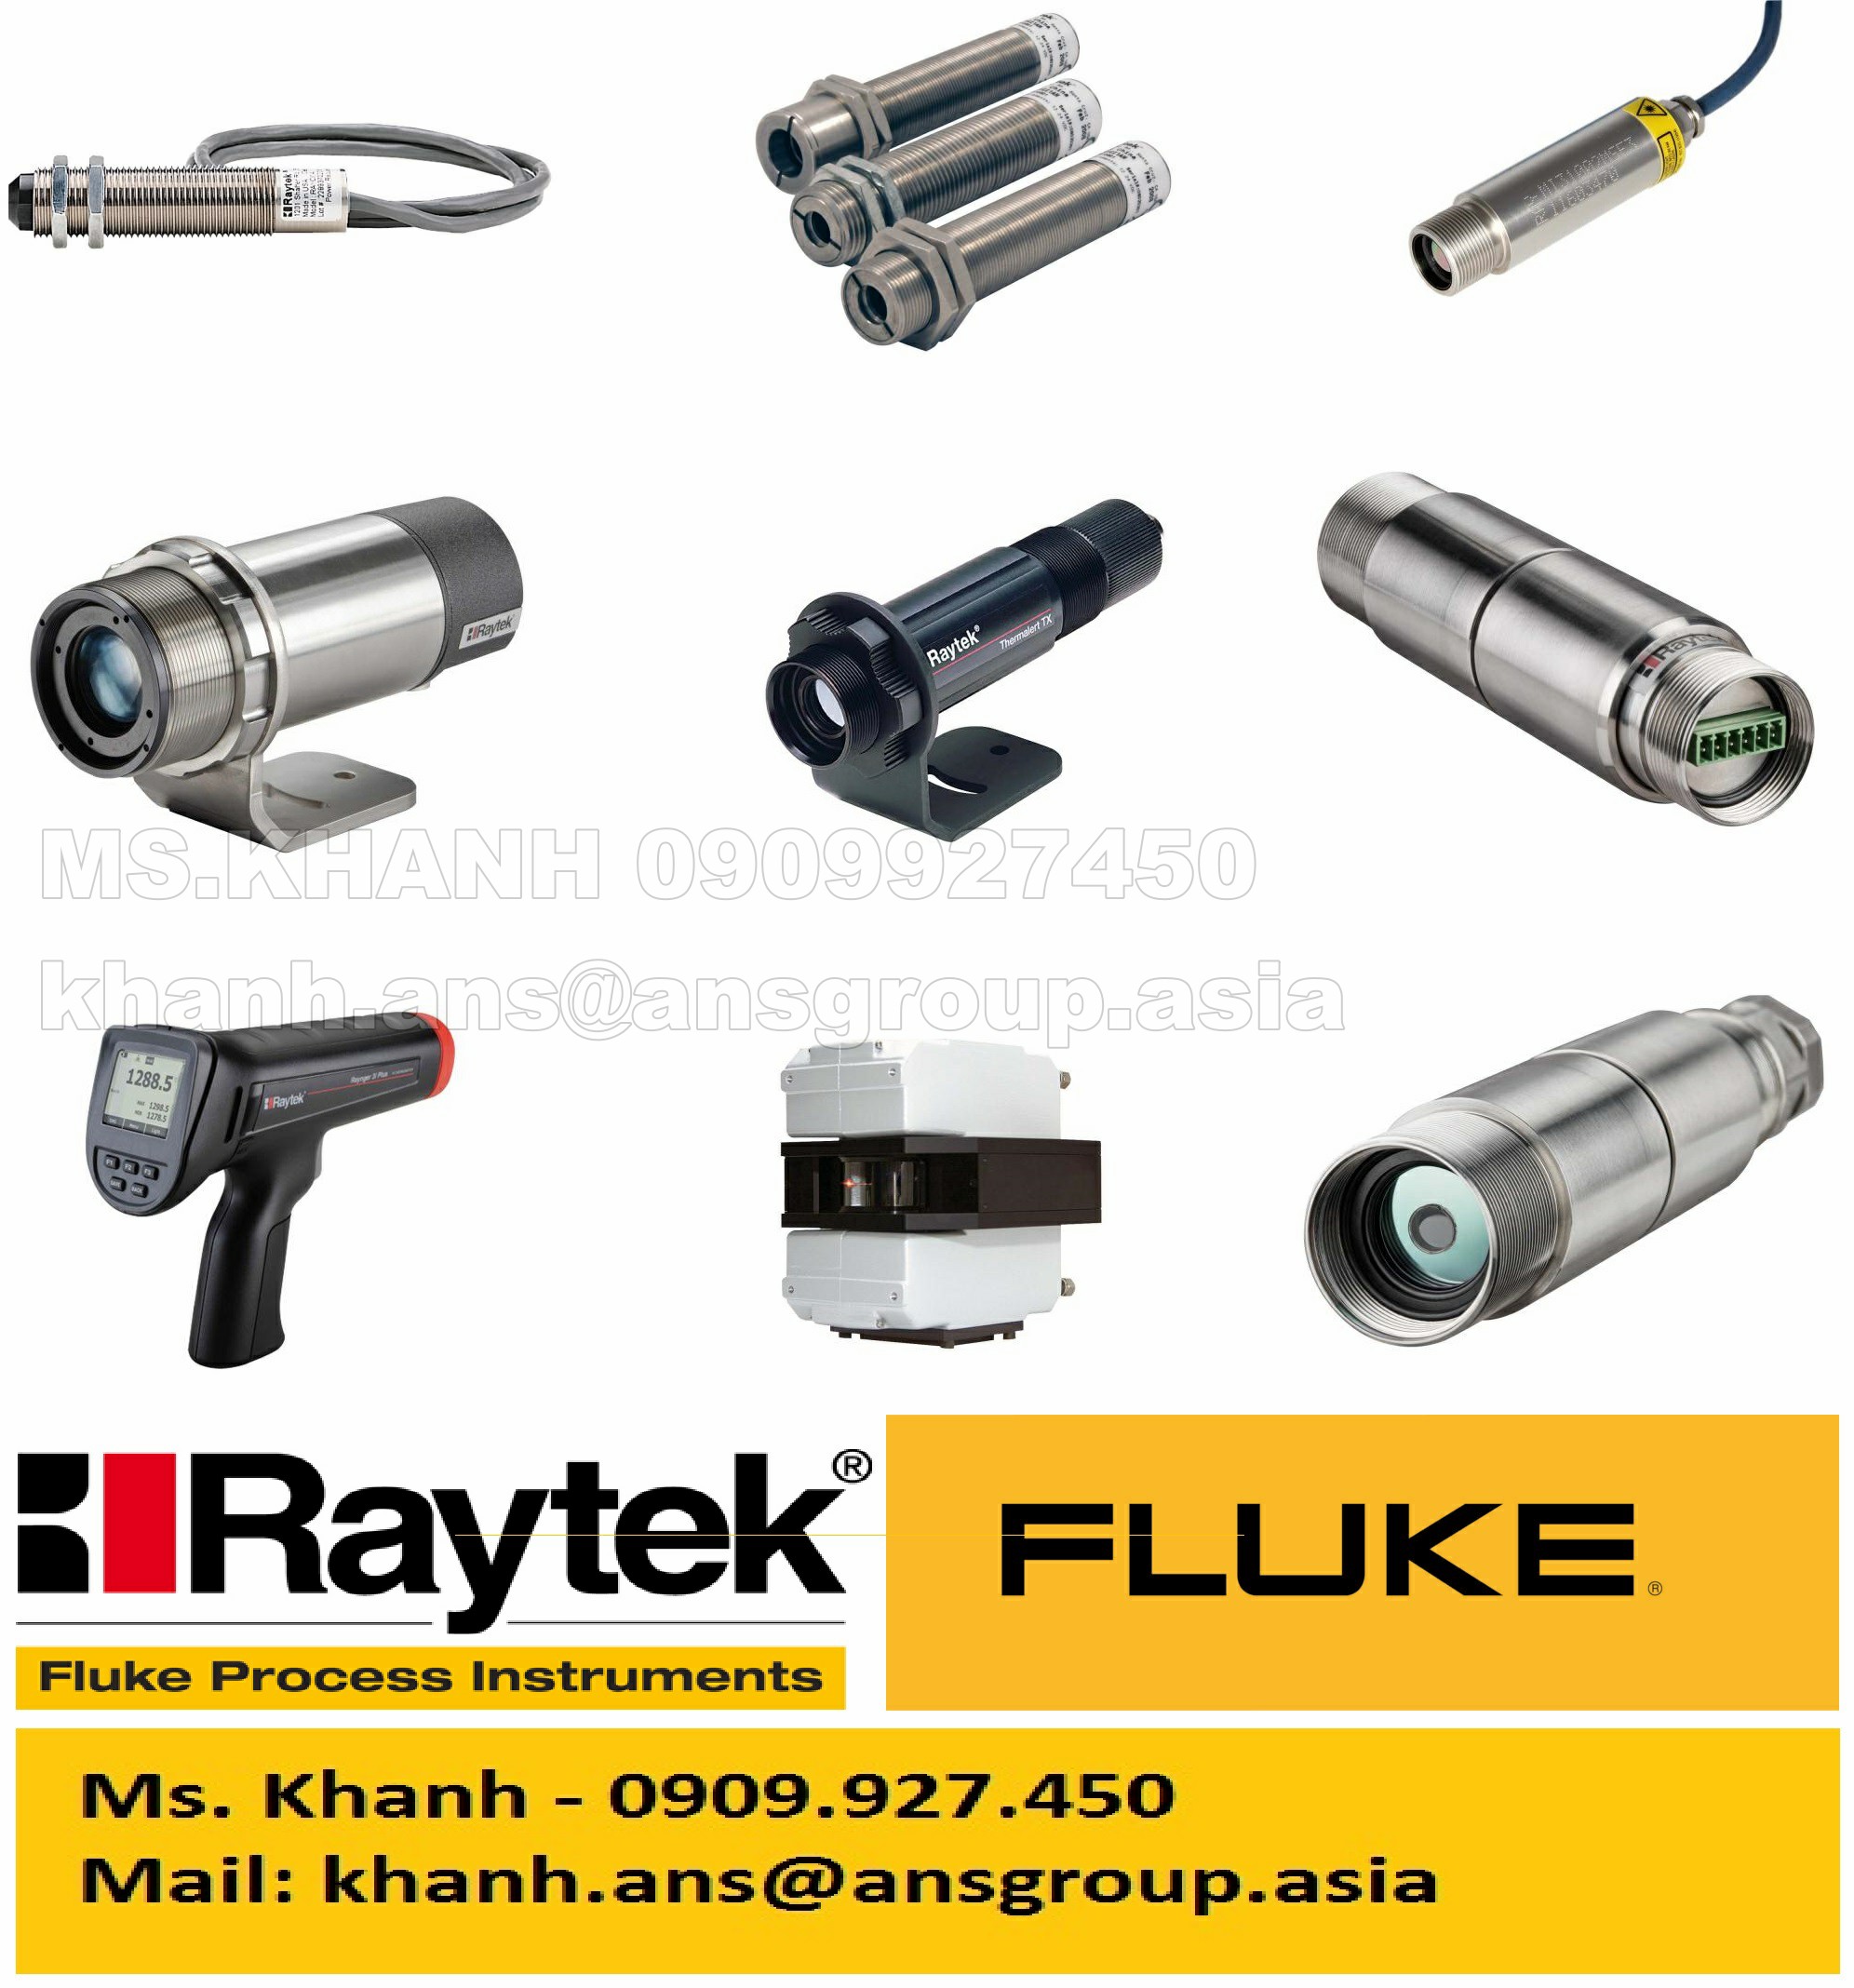 cap-e-2cltcb8-low-temp-85°c-multi-conductor-cable-with-connector-raytek-fluke-process-instrument-vietnam.png